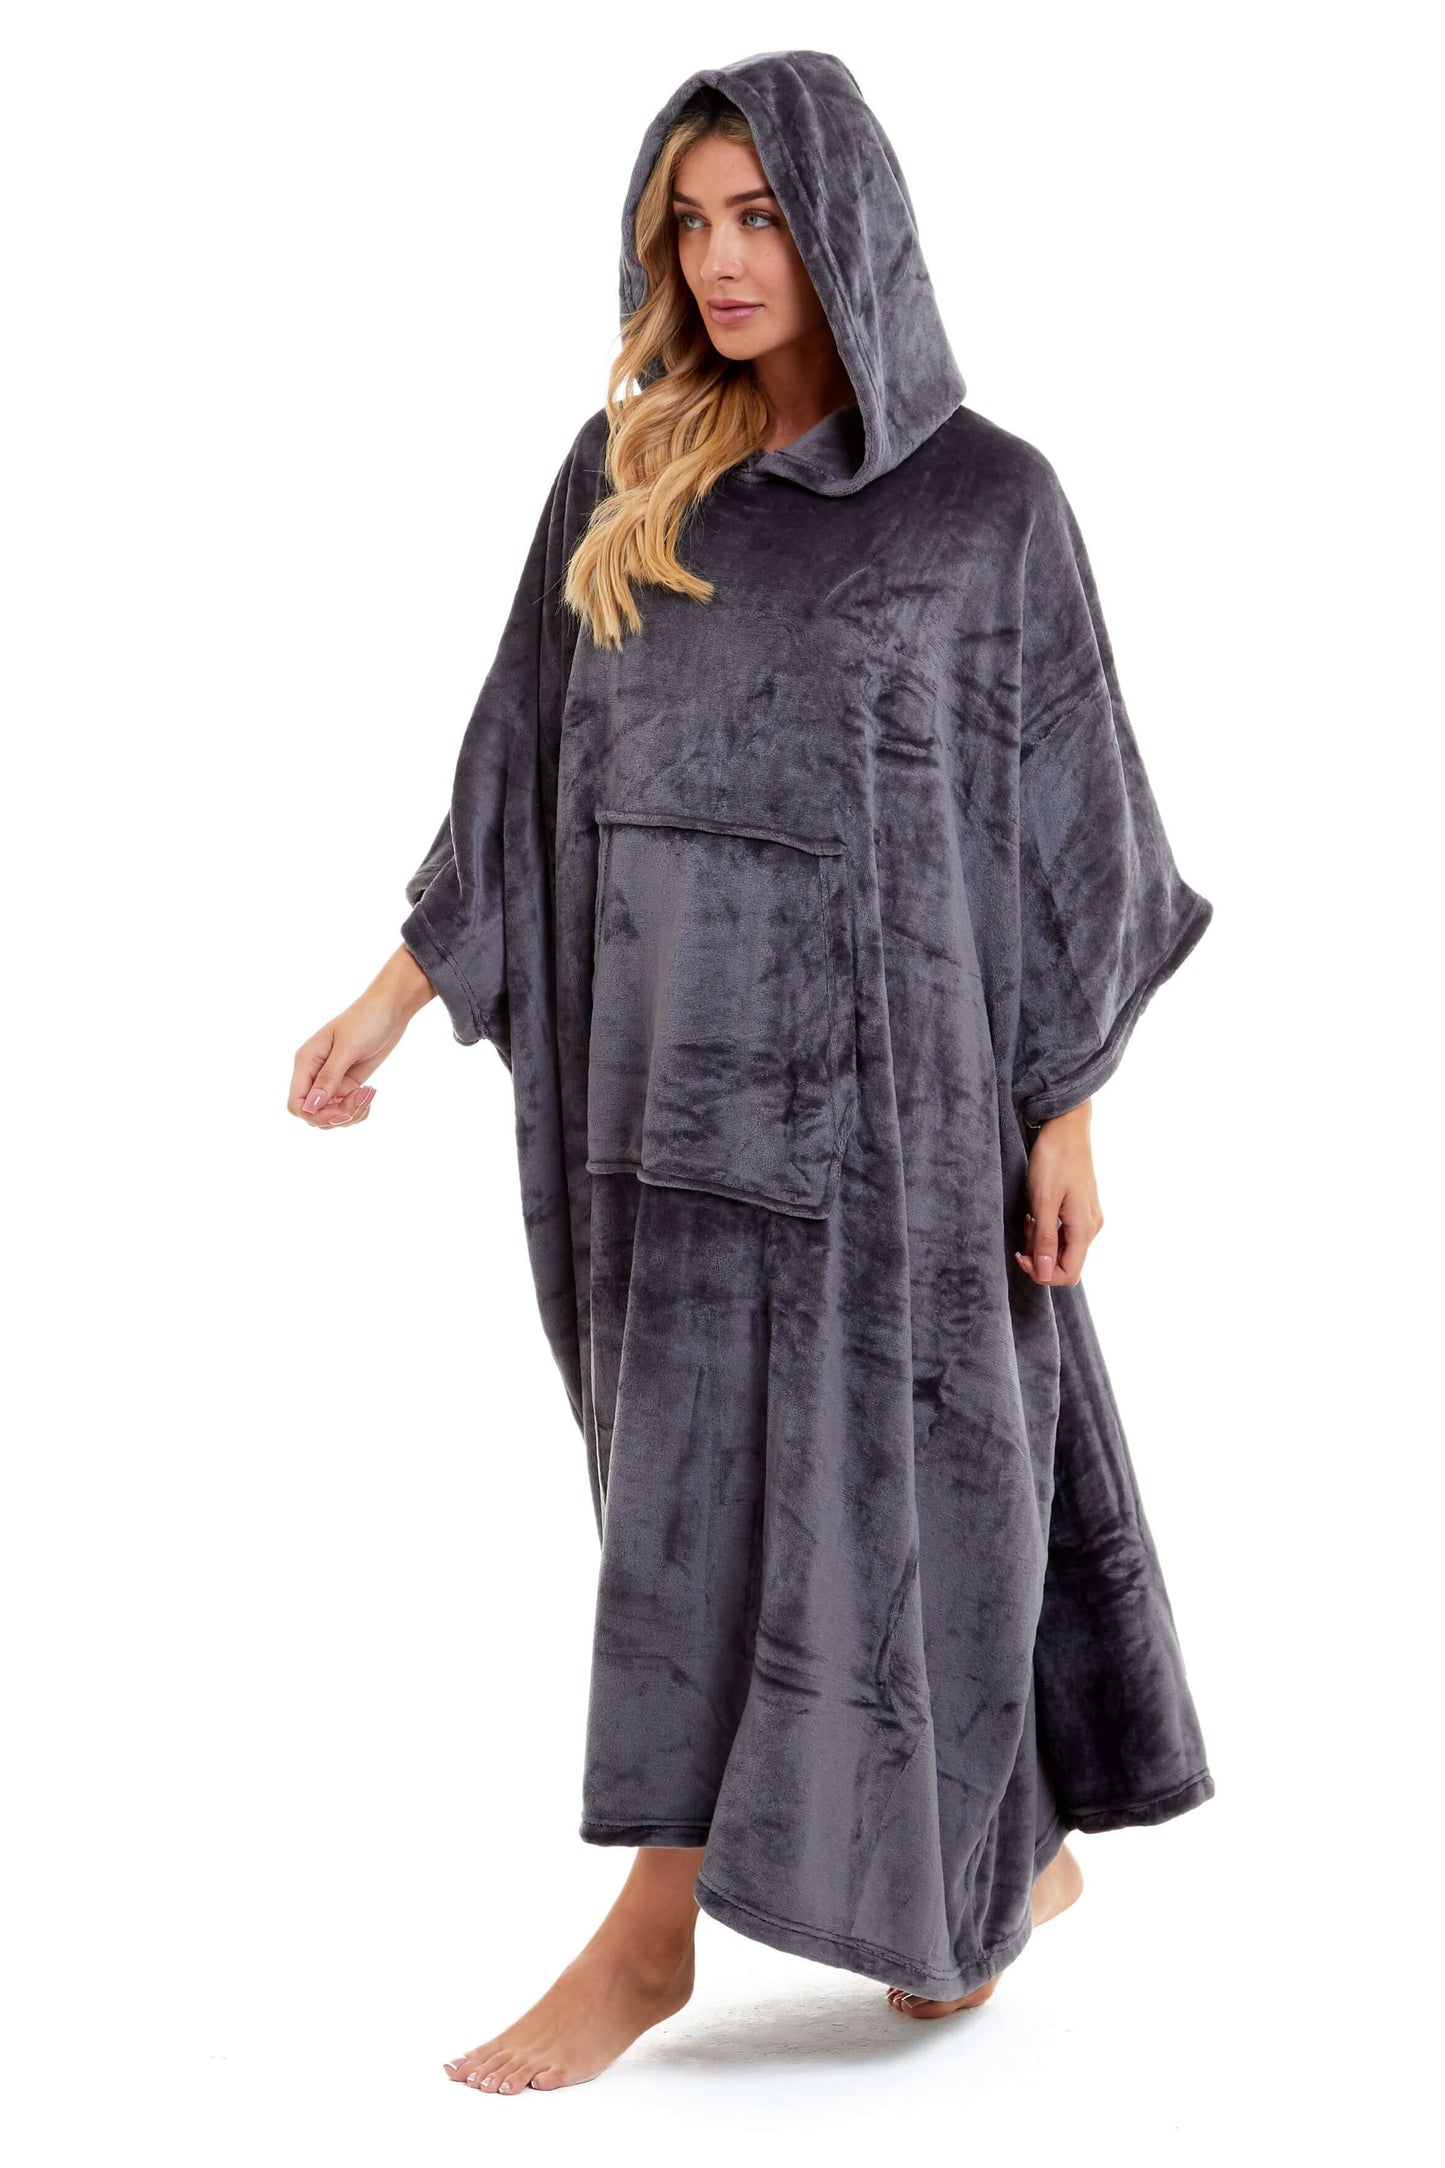 Women's Oversized Hooded Poncho Blanket, Navy & Charcoal. Buy now for £20.00. A Hooded Blanket by Daisy Dreamer. charcoal, clothing, comfortable, cosy, designer, dressing, flannel, fleece, fluffy, formal wear, girls, hooded, hooded blanket, hooded robe, h